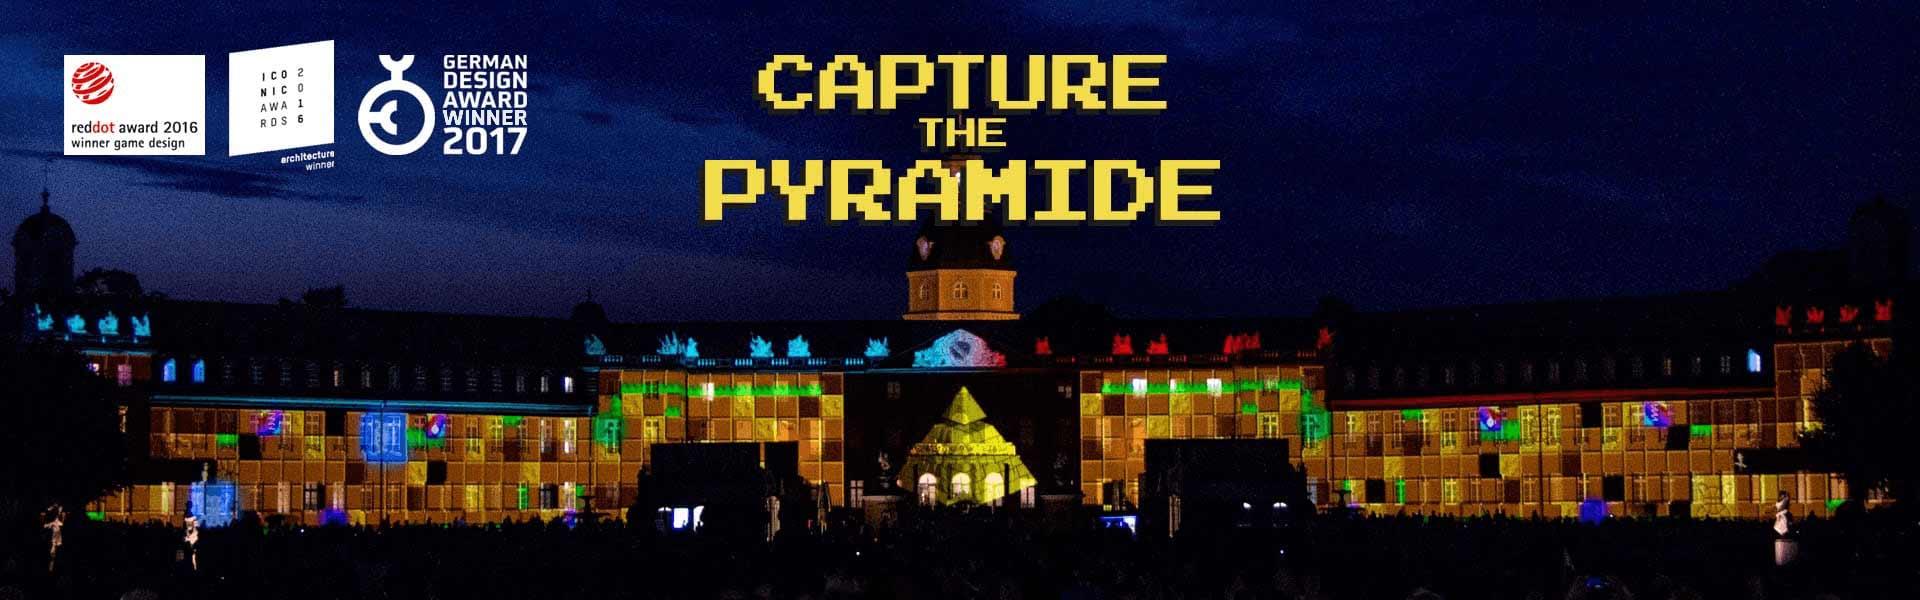 Capture the Pyramide Projection Mapping Crowd Game